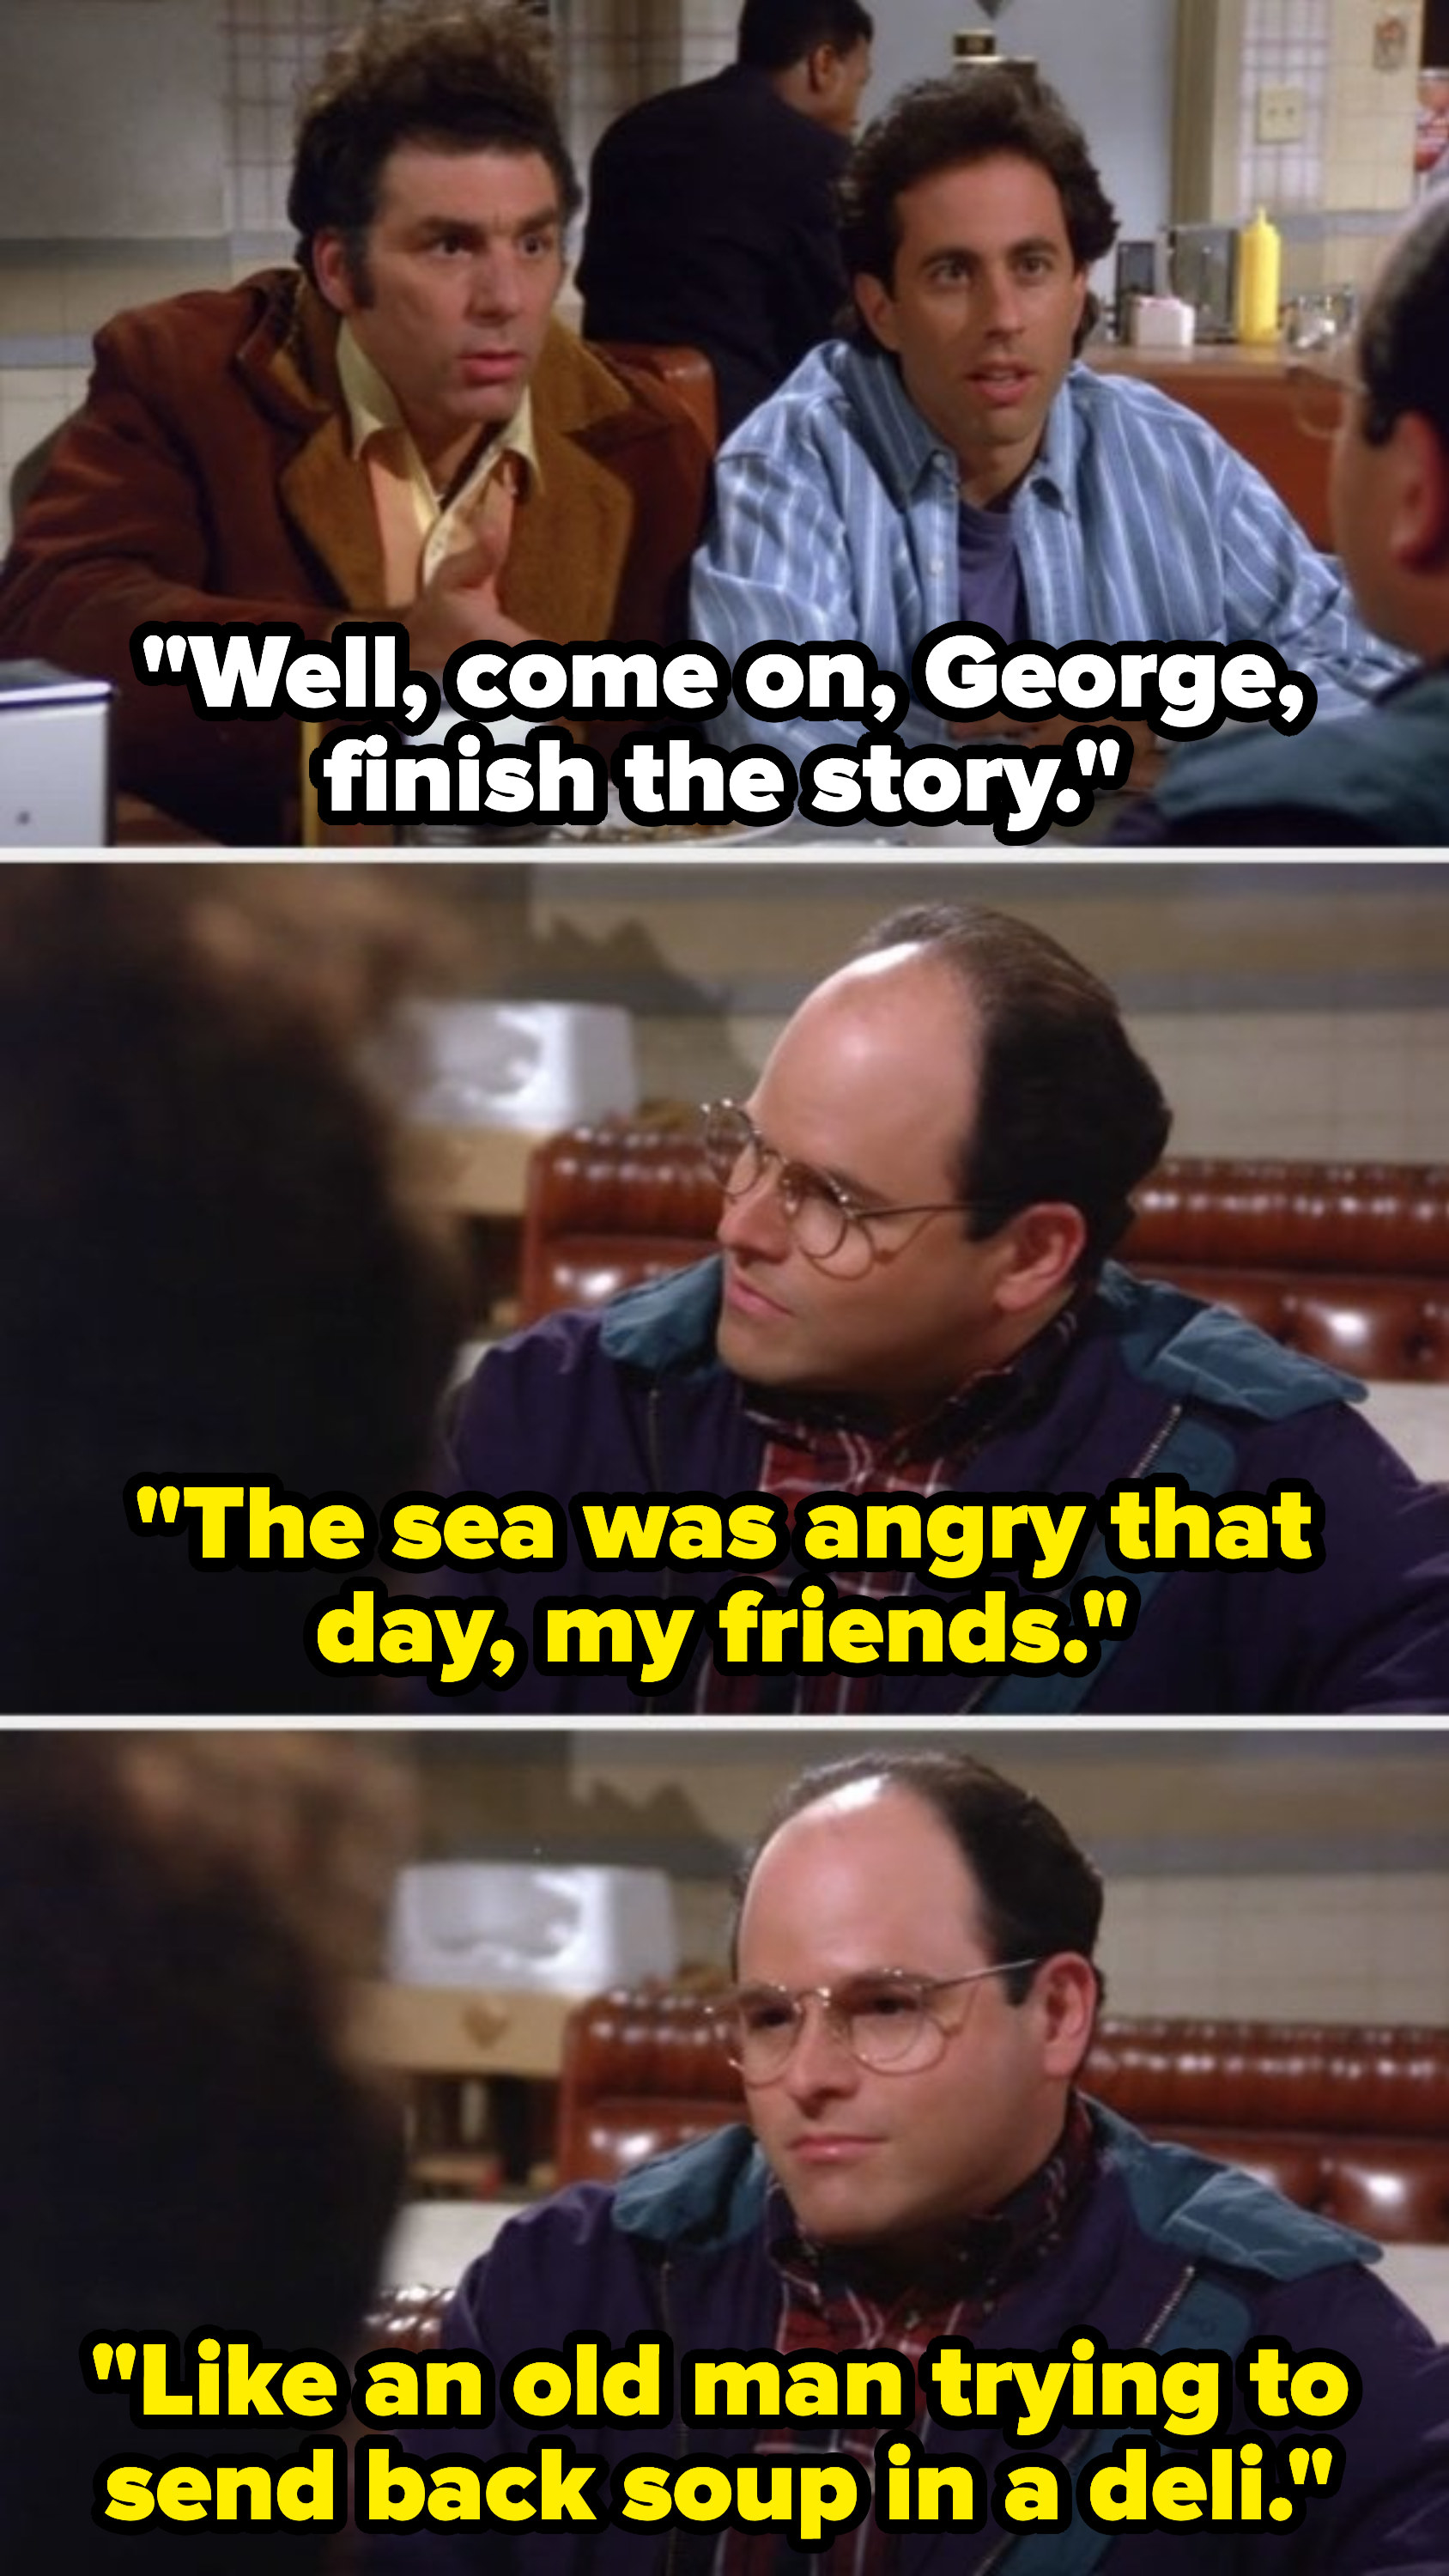 George tells his story about saving a whale